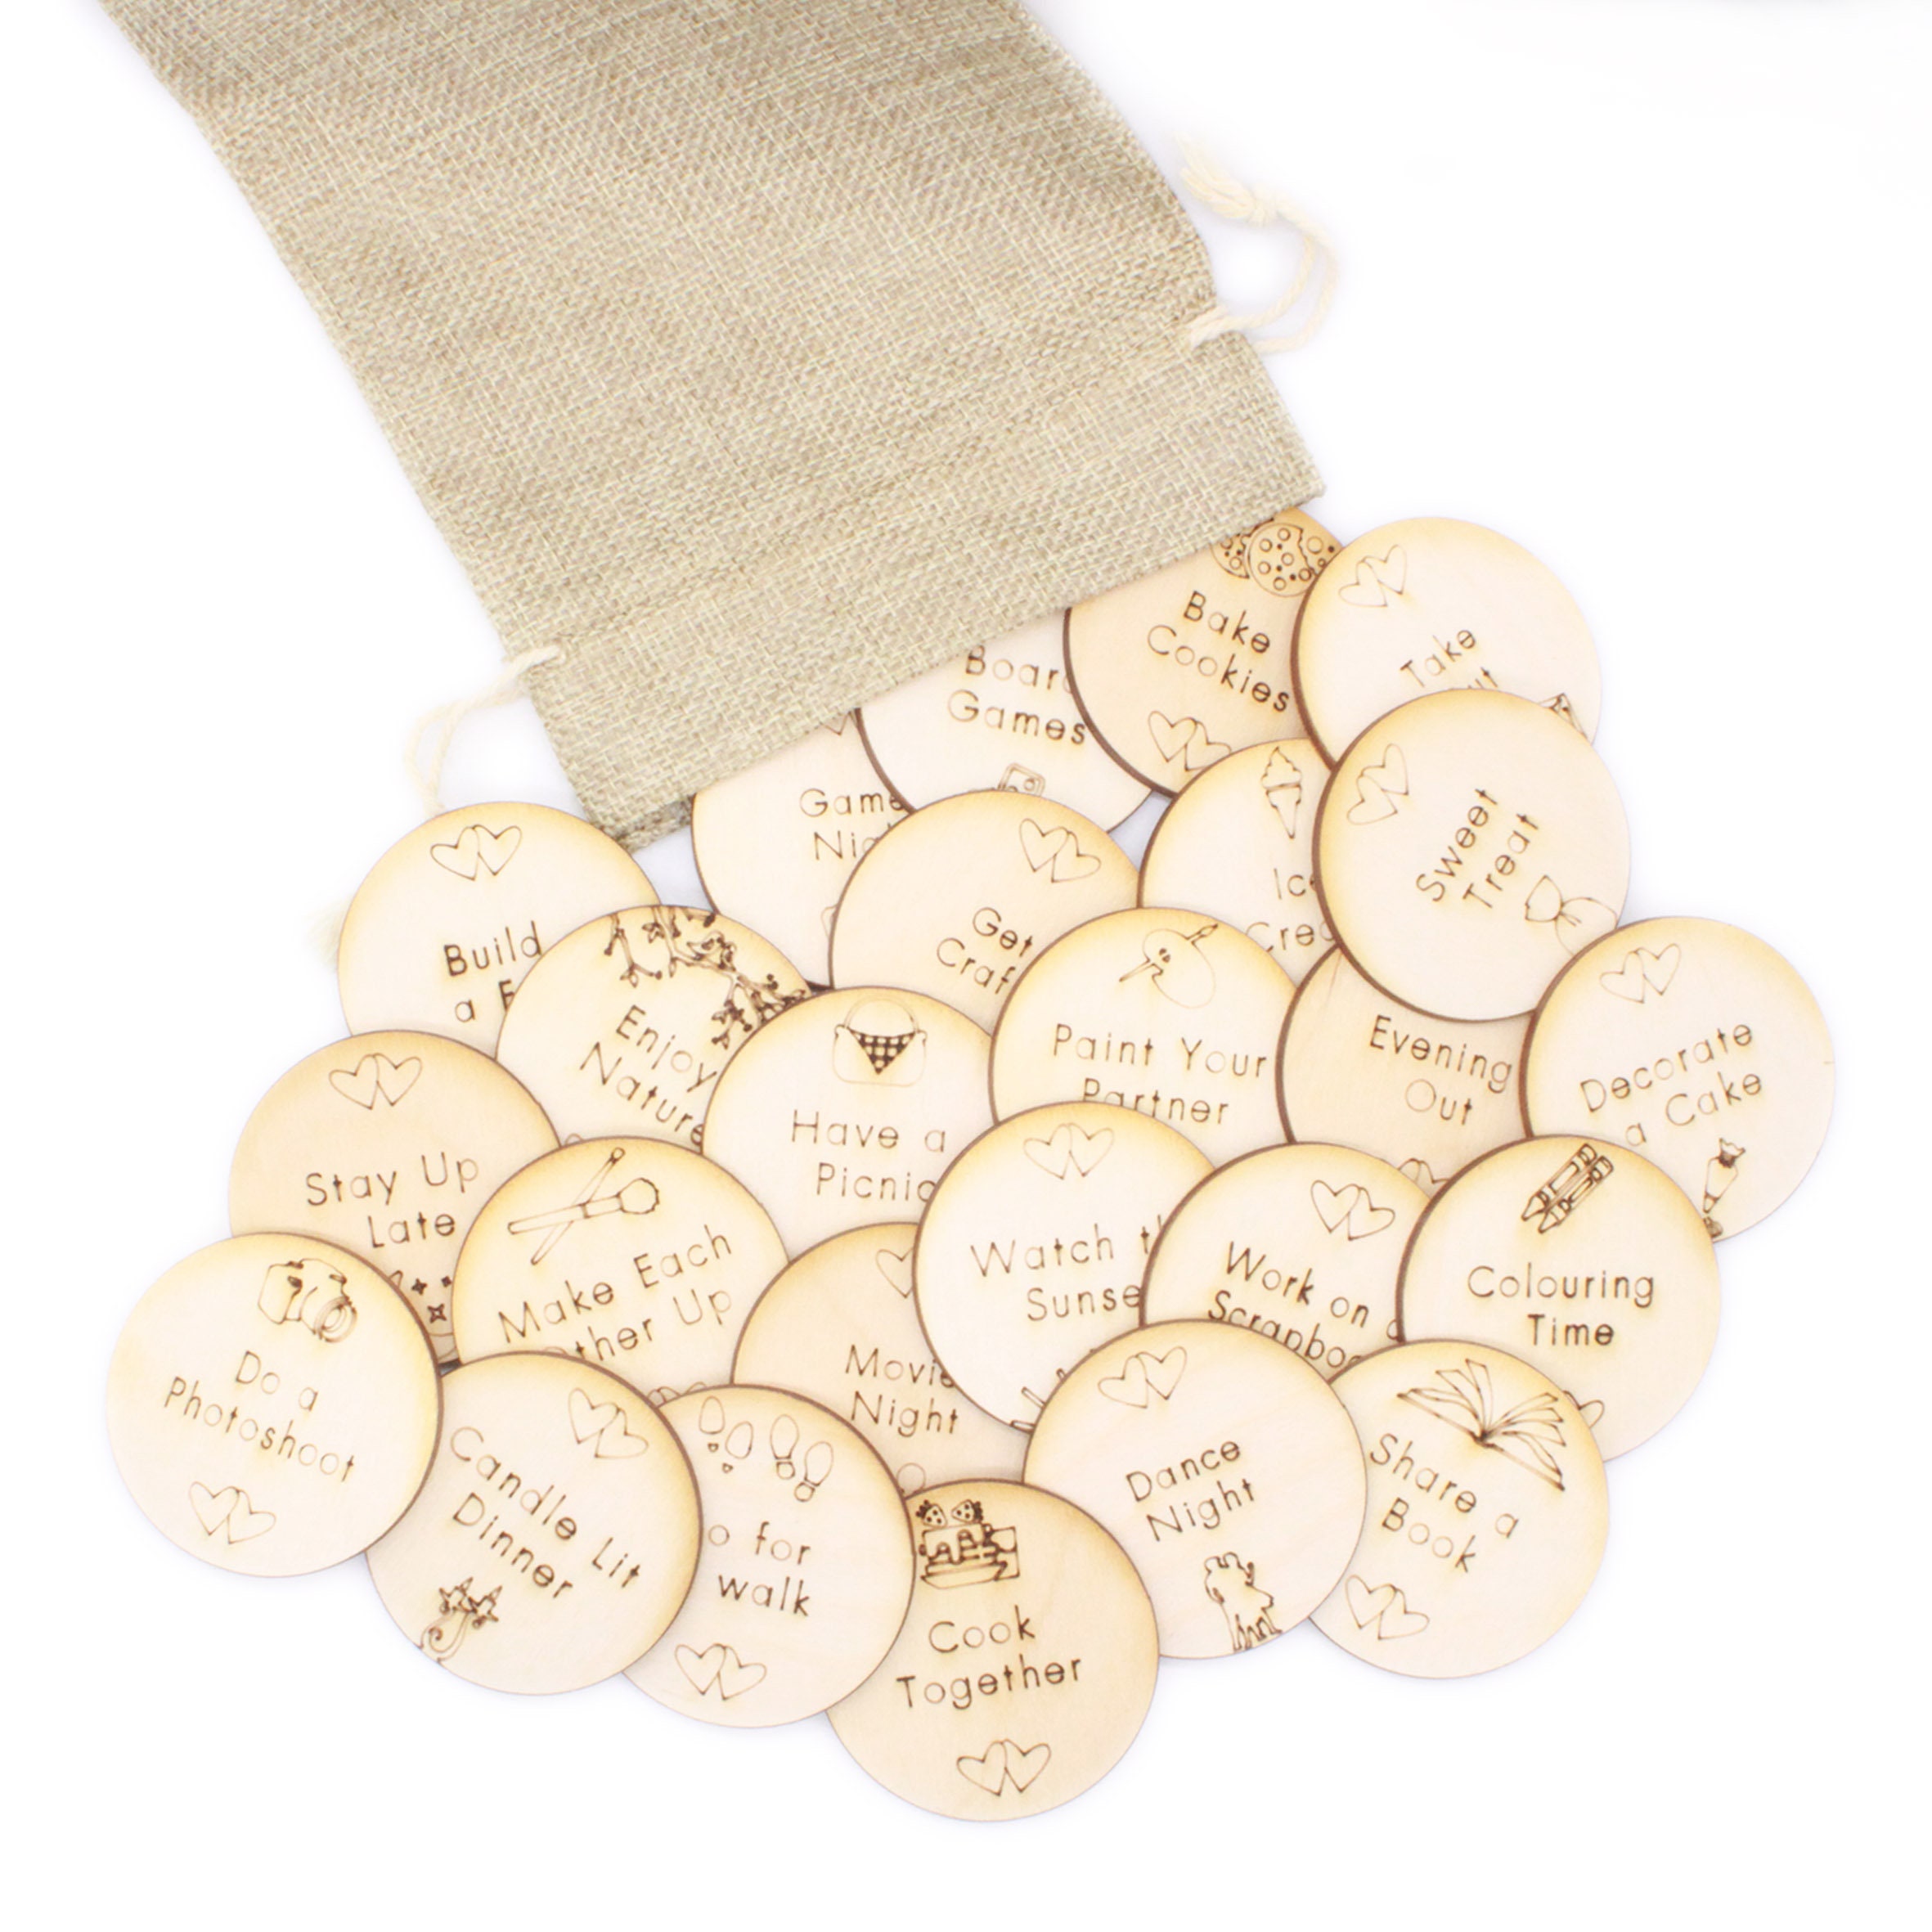 25 Date Night Tokens Laser Cut From 3mm Ply Wood